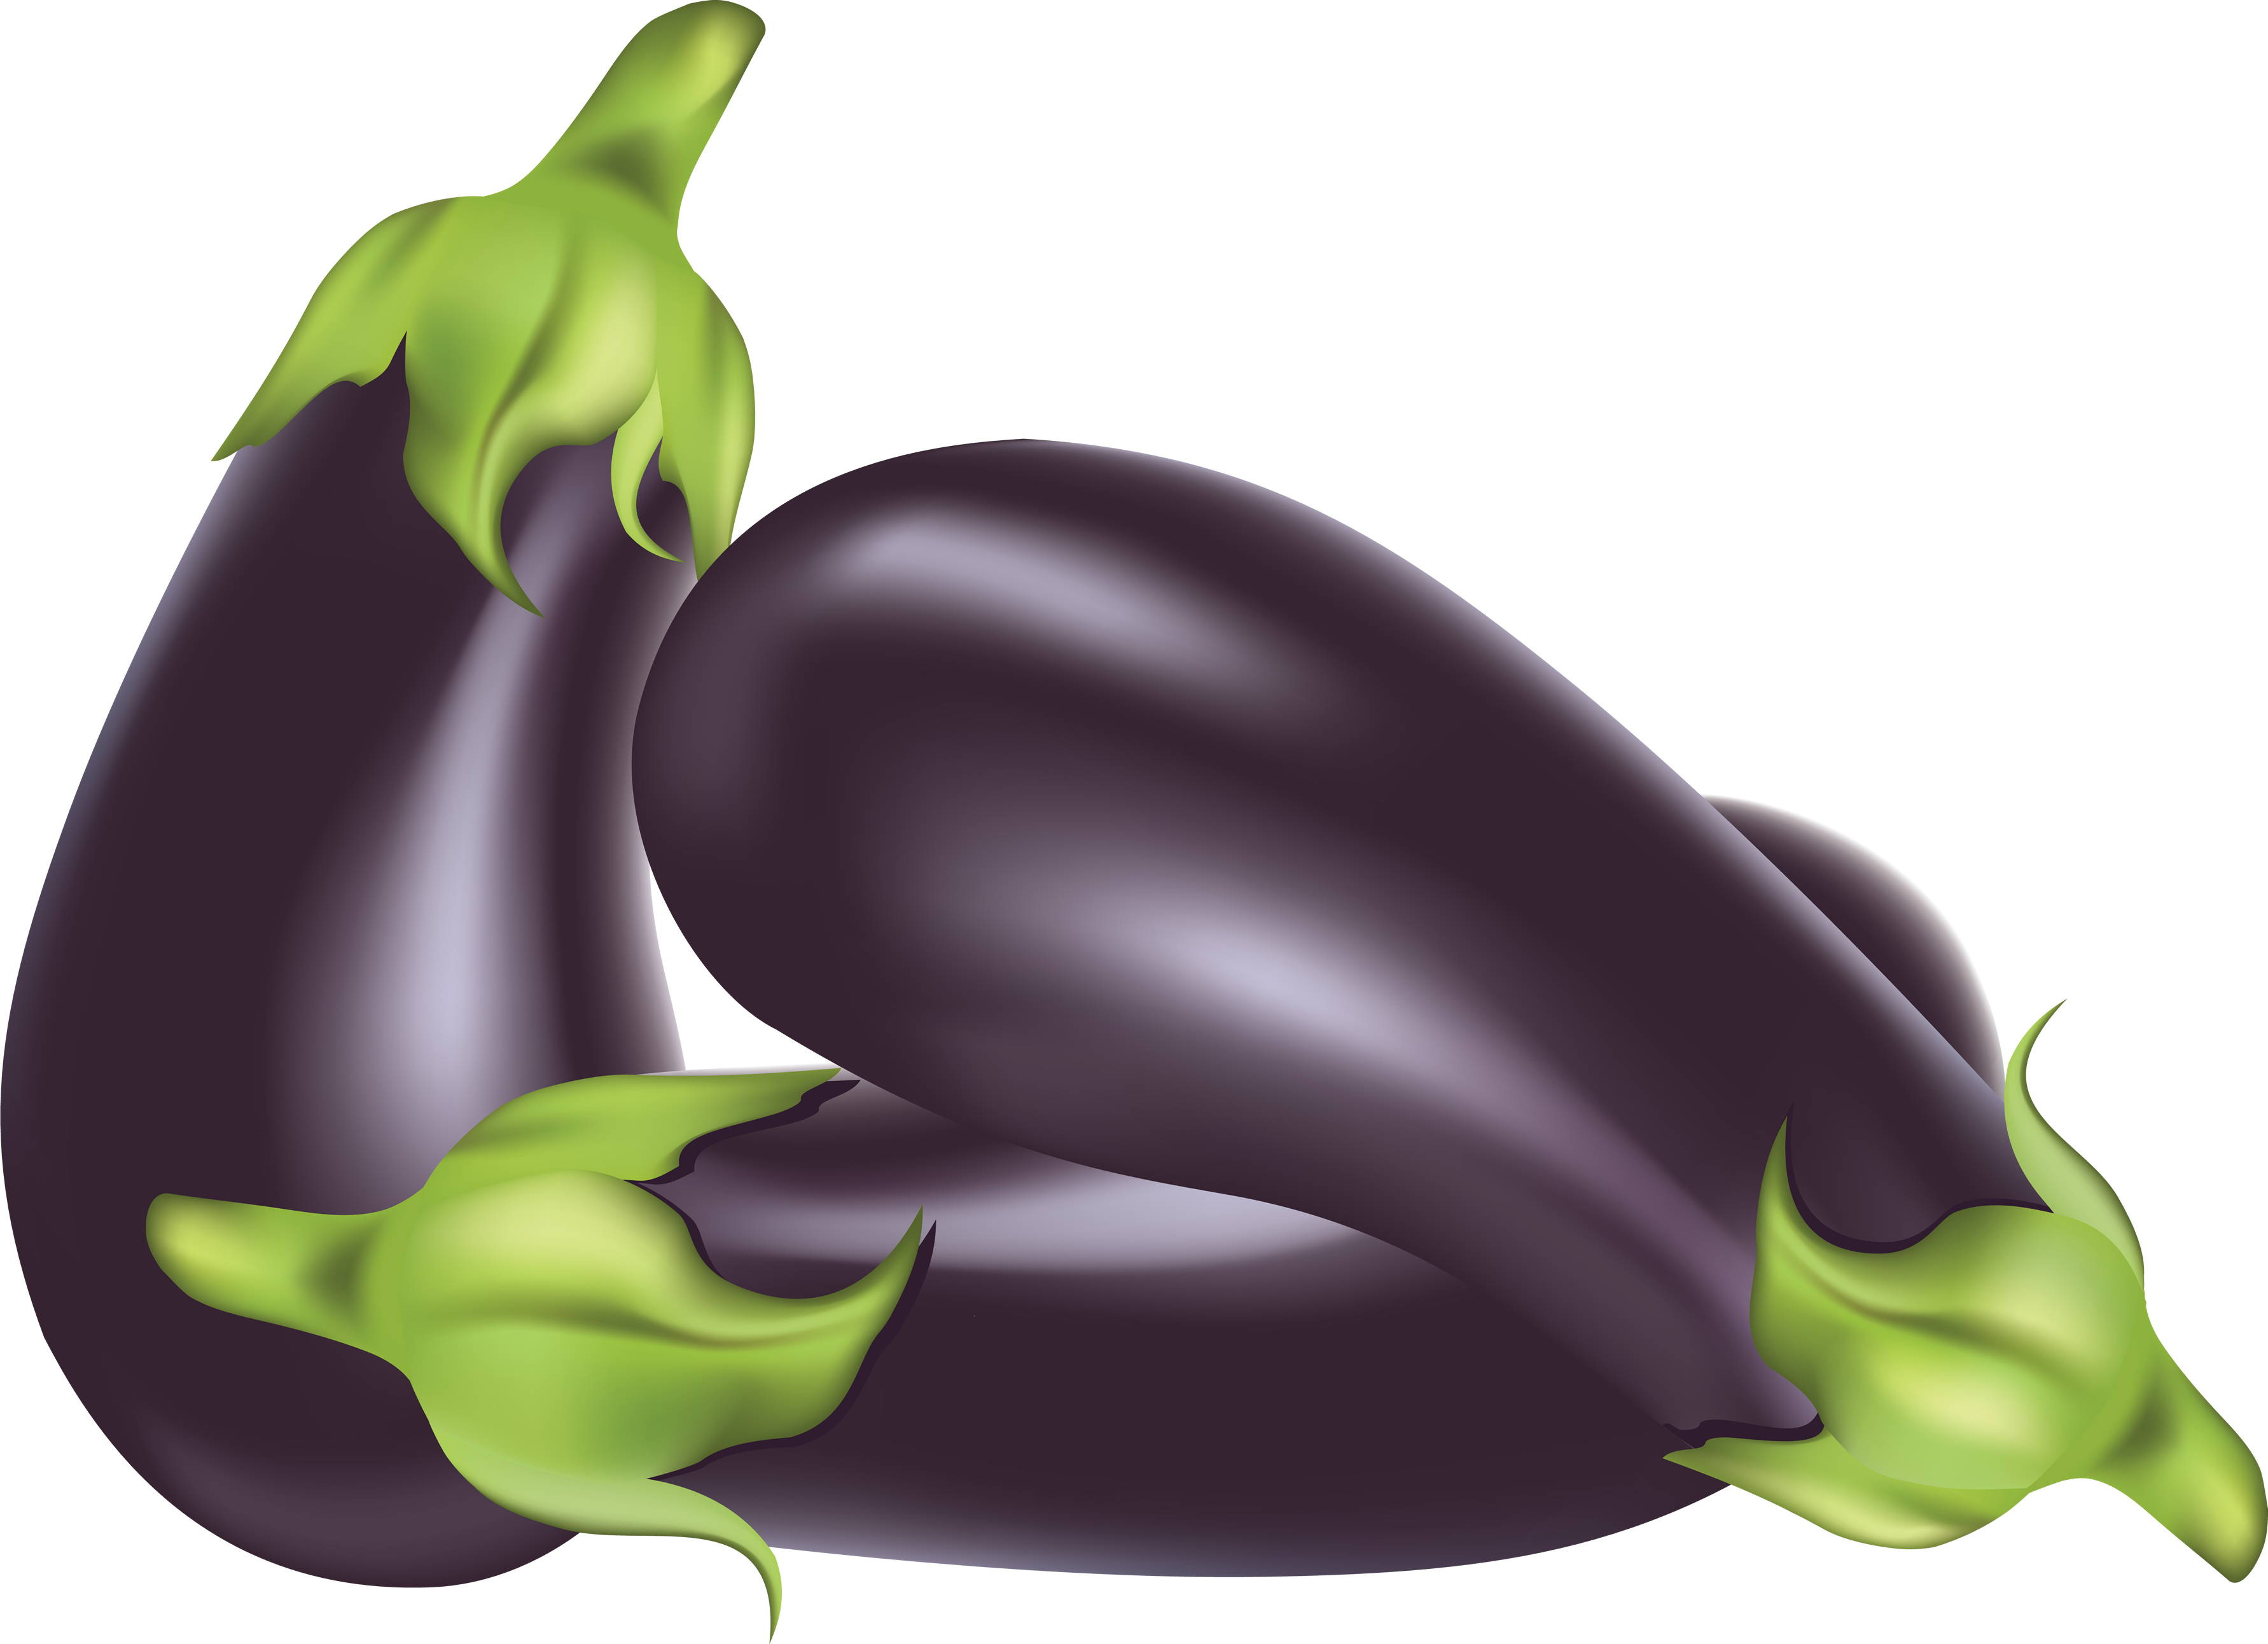 Clipart Of Eggplant Three The Cliparts